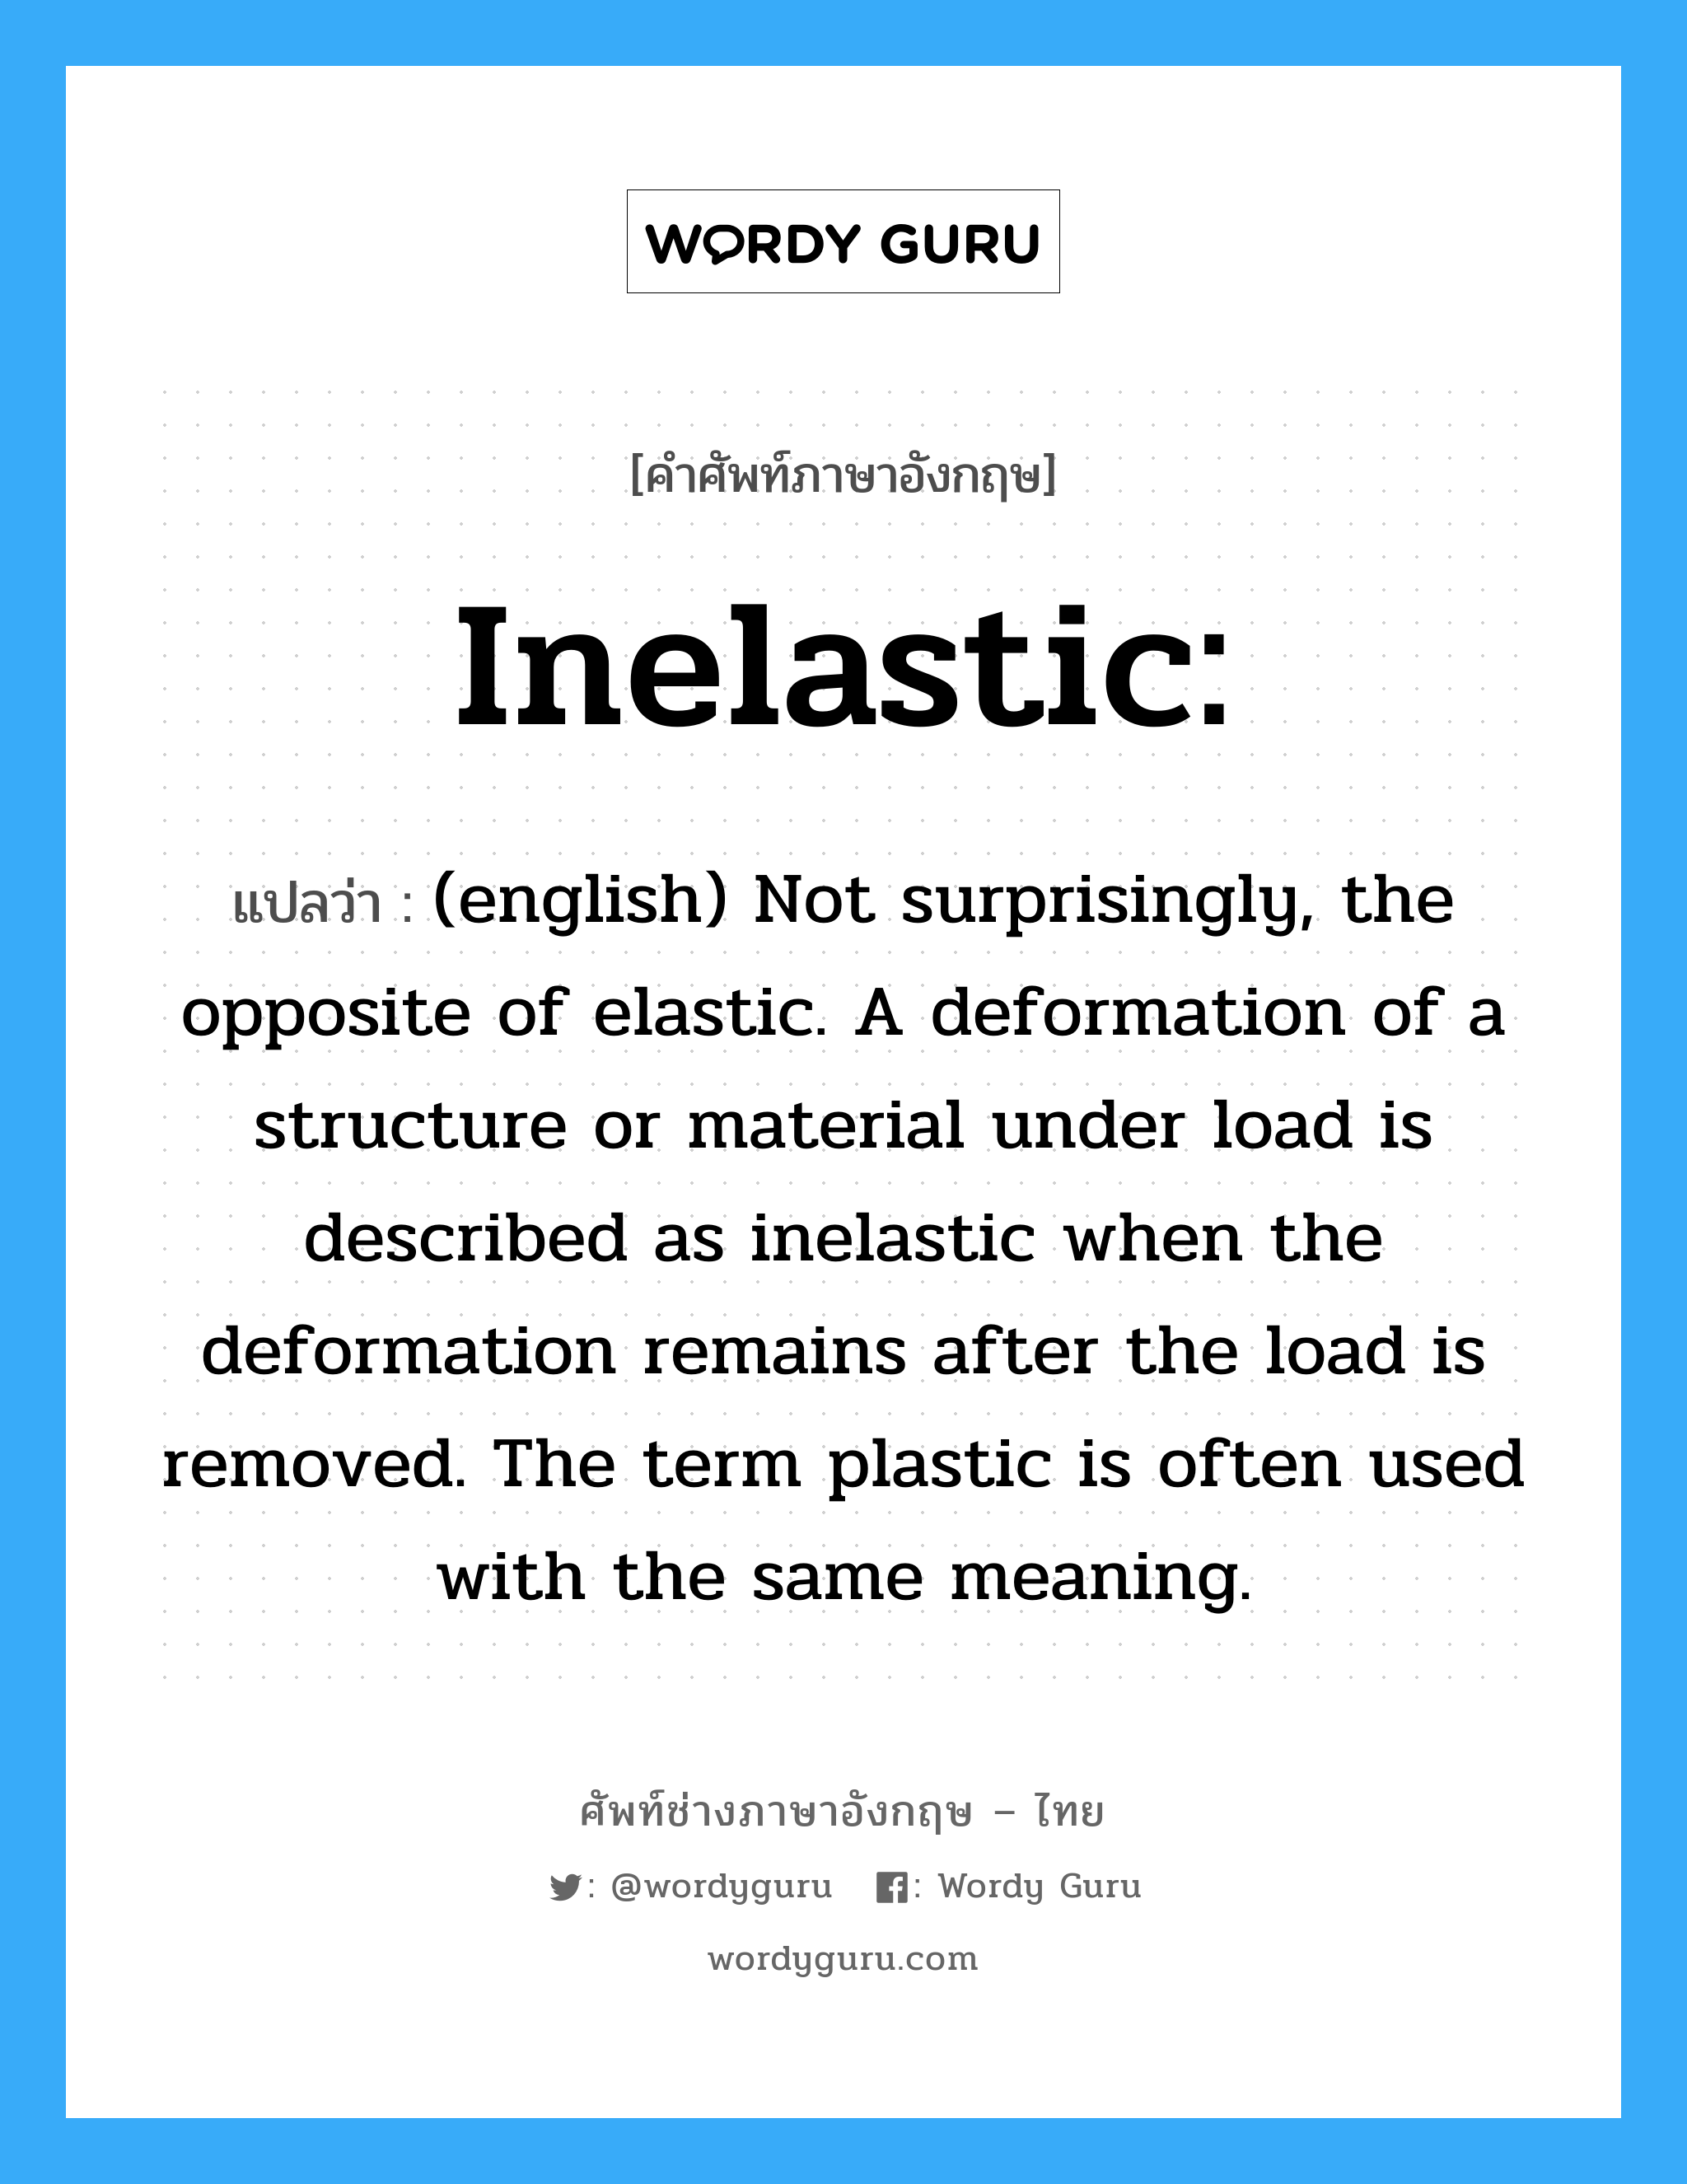 Inelastic: แปลว่า?, คำศัพท์ช่างภาษาอังกฤษ - ไทย Inelastic: คำศัพท์ภาษาอังกฤษ Inelastic: แปลว่า (english) Not surprisingly, the opposite of elastic. A deformation of a structure or material under load is described as inelastic when the deformation remains after the load is removed. The term plastic is often used with the same meaning.